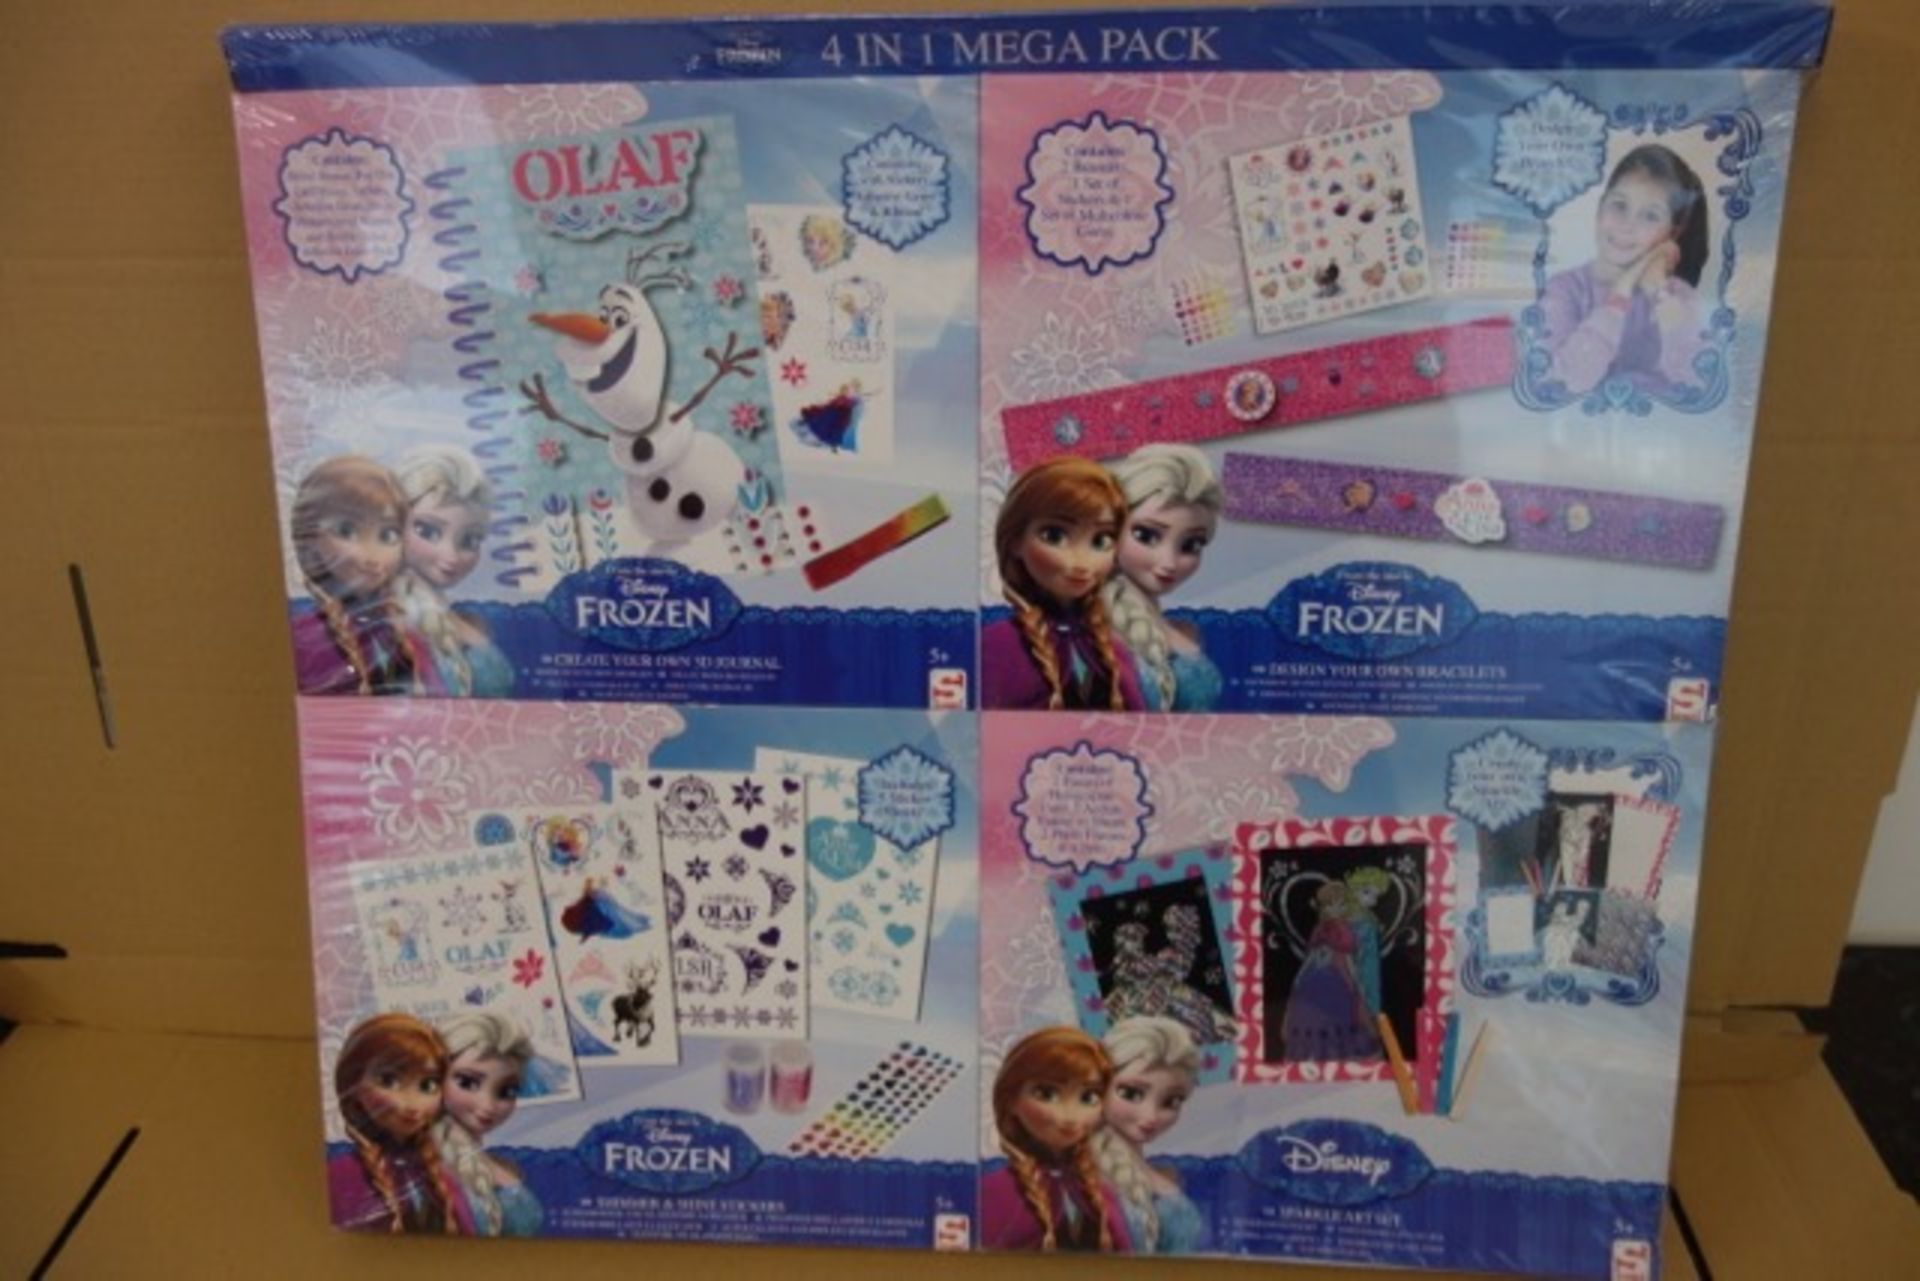 Pallet to contain 90 x Brand New Disney Frozen 4 in 1 Mega Pack. Each Includes: Create Your Own 3D